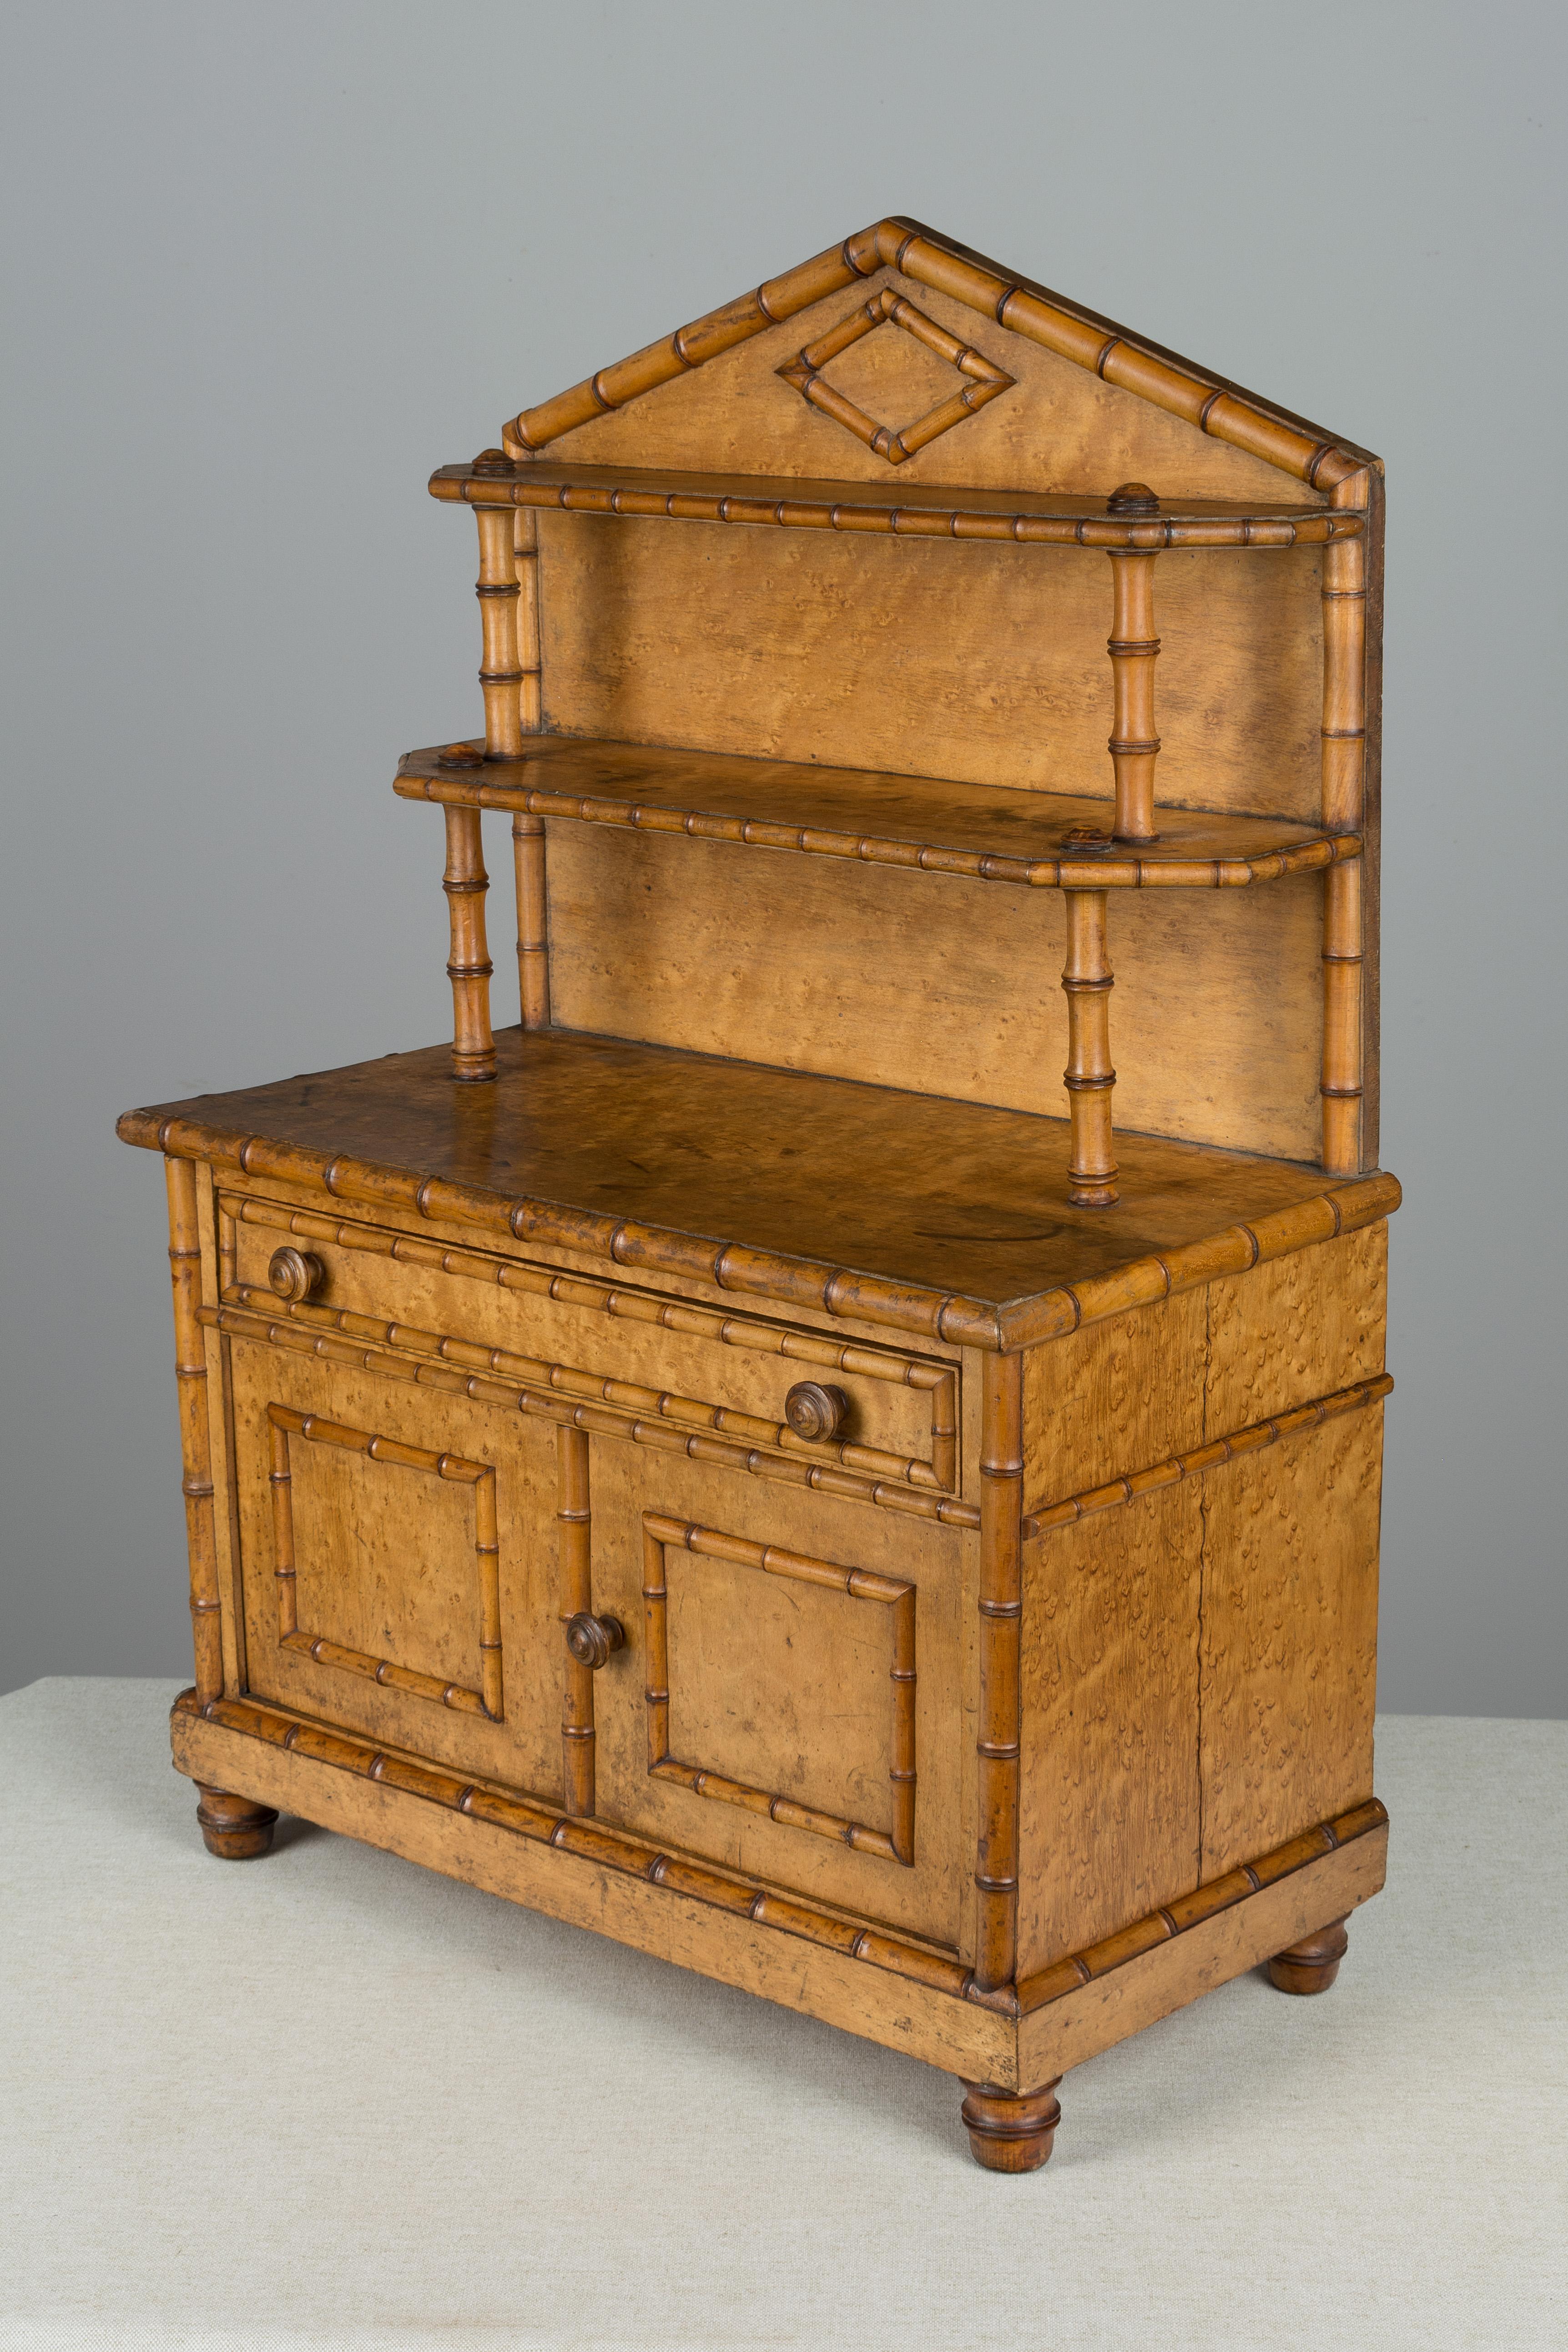 A 19th century French miniature faux bamboo buffet made of bird’s eye maple. Well-crafted with tiered shelves on top and cabinet doors opening to a single shelf. A unique large scale doll furniture piece. Left back foot is missing, as found.